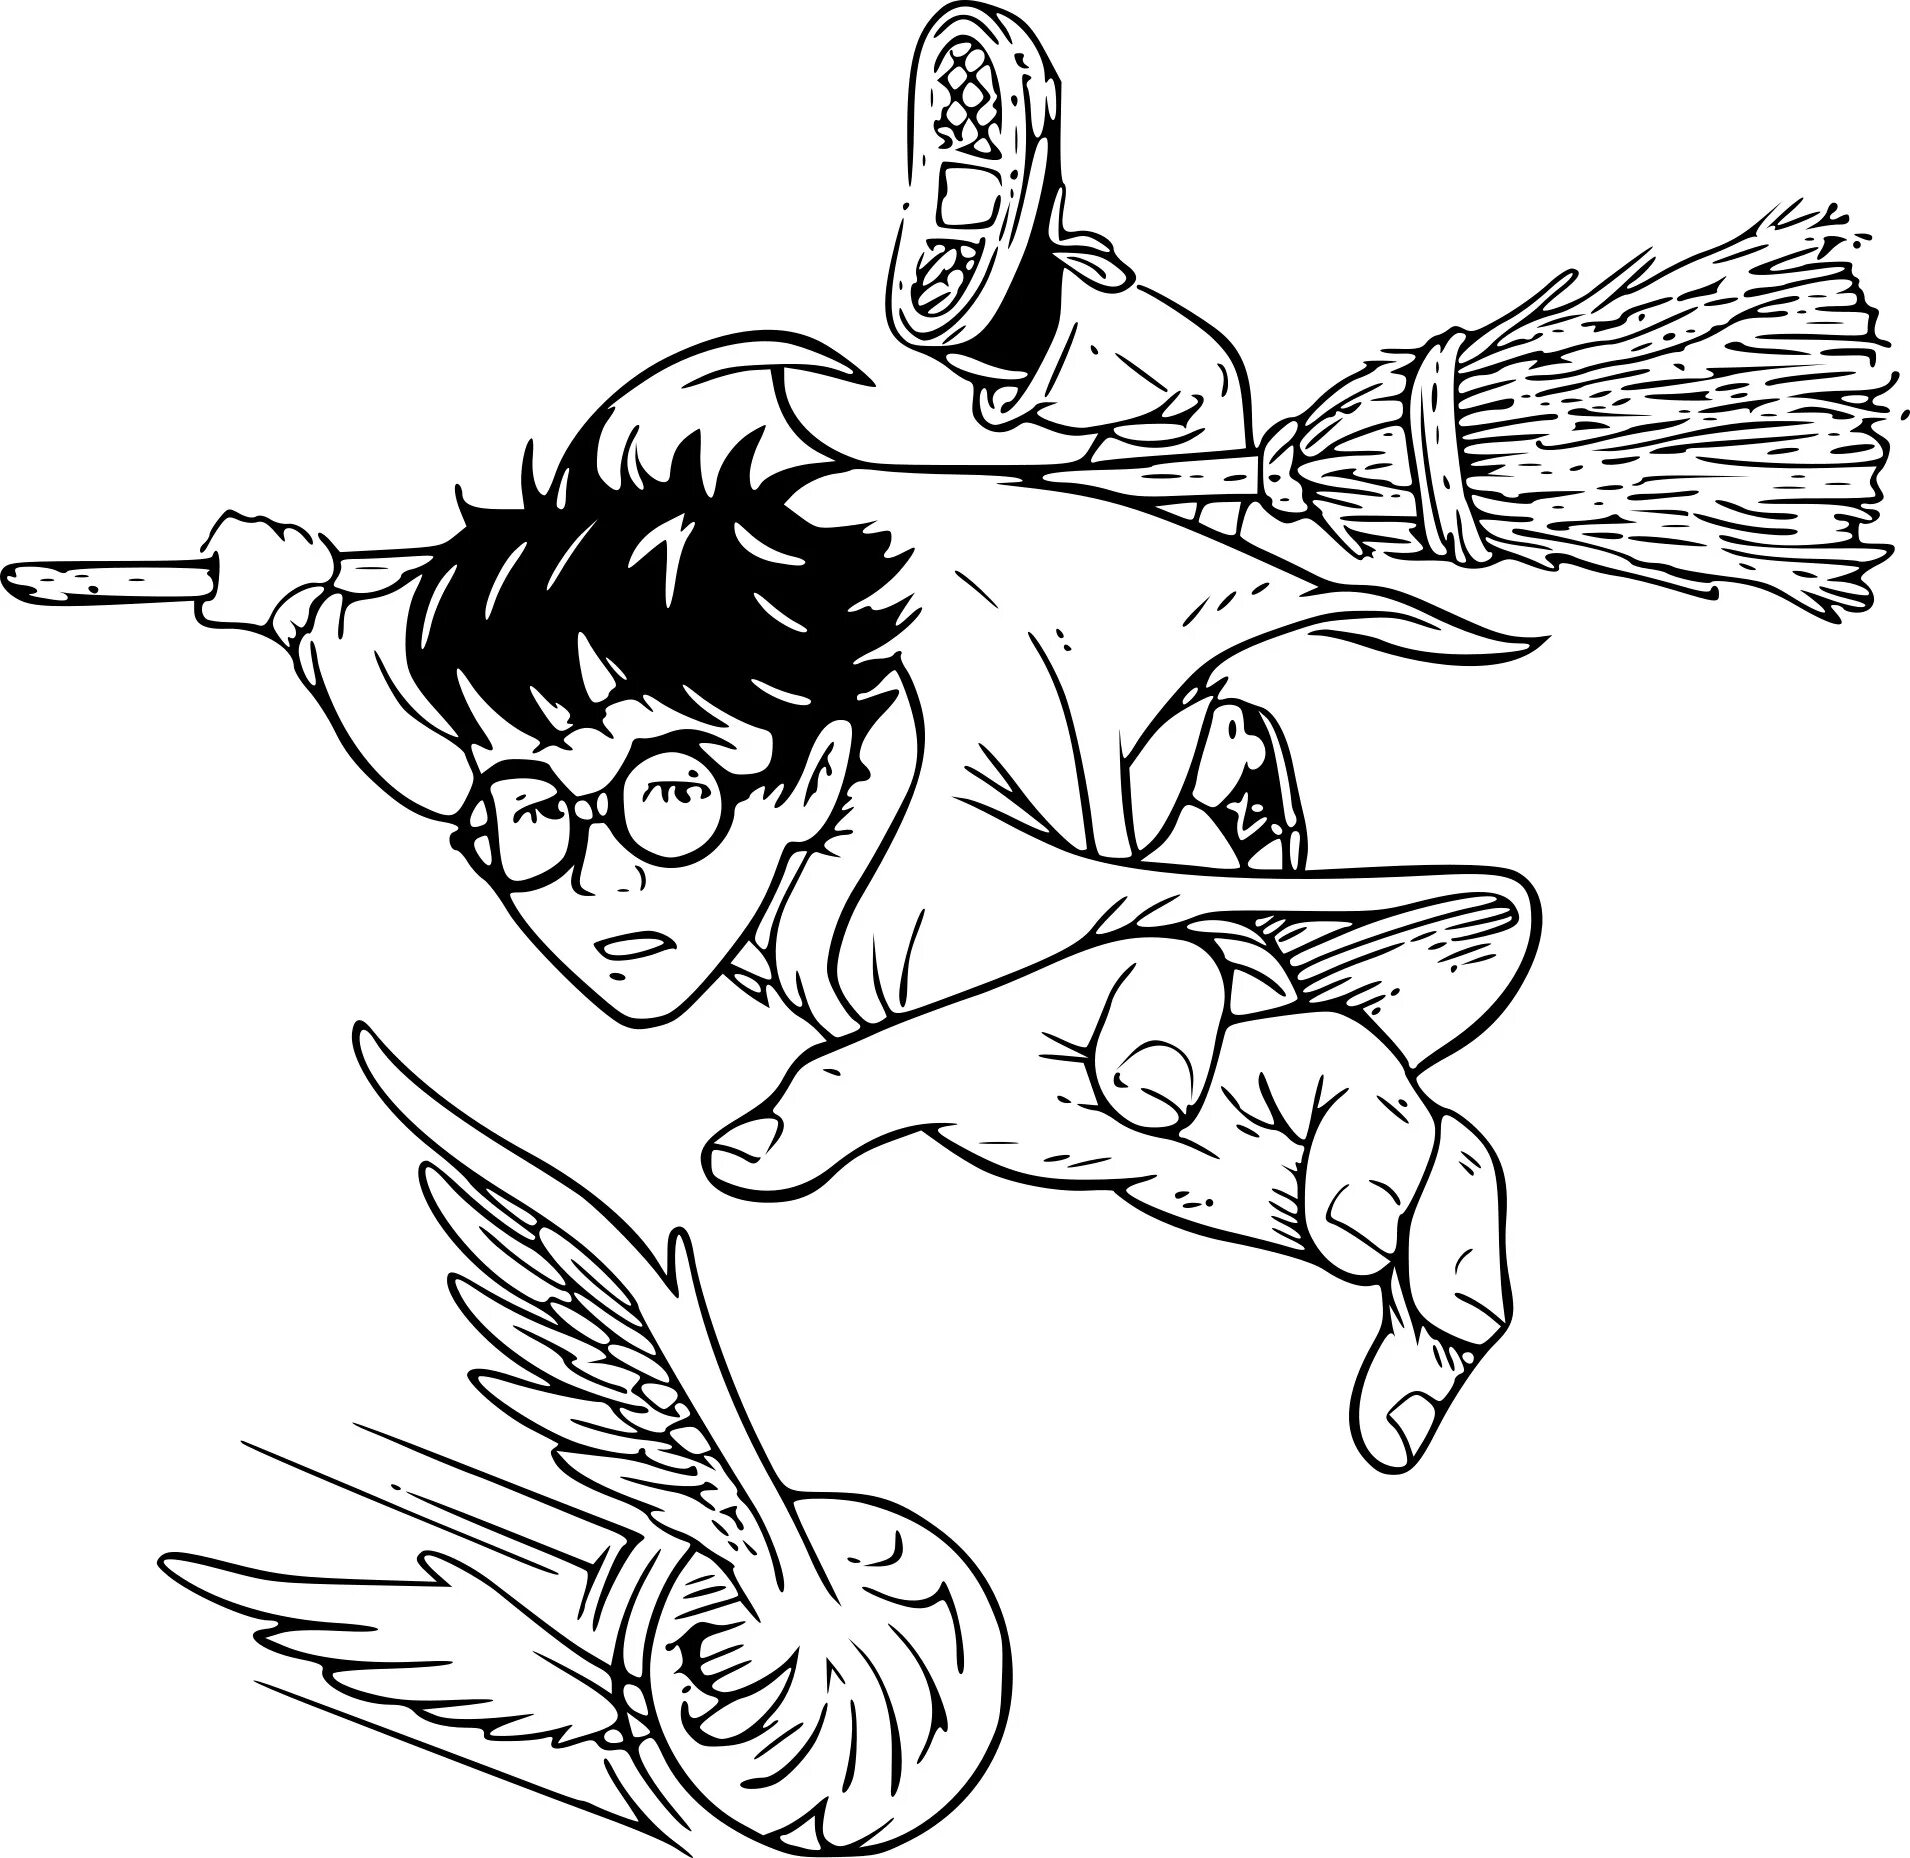 Harry potter drawing #9